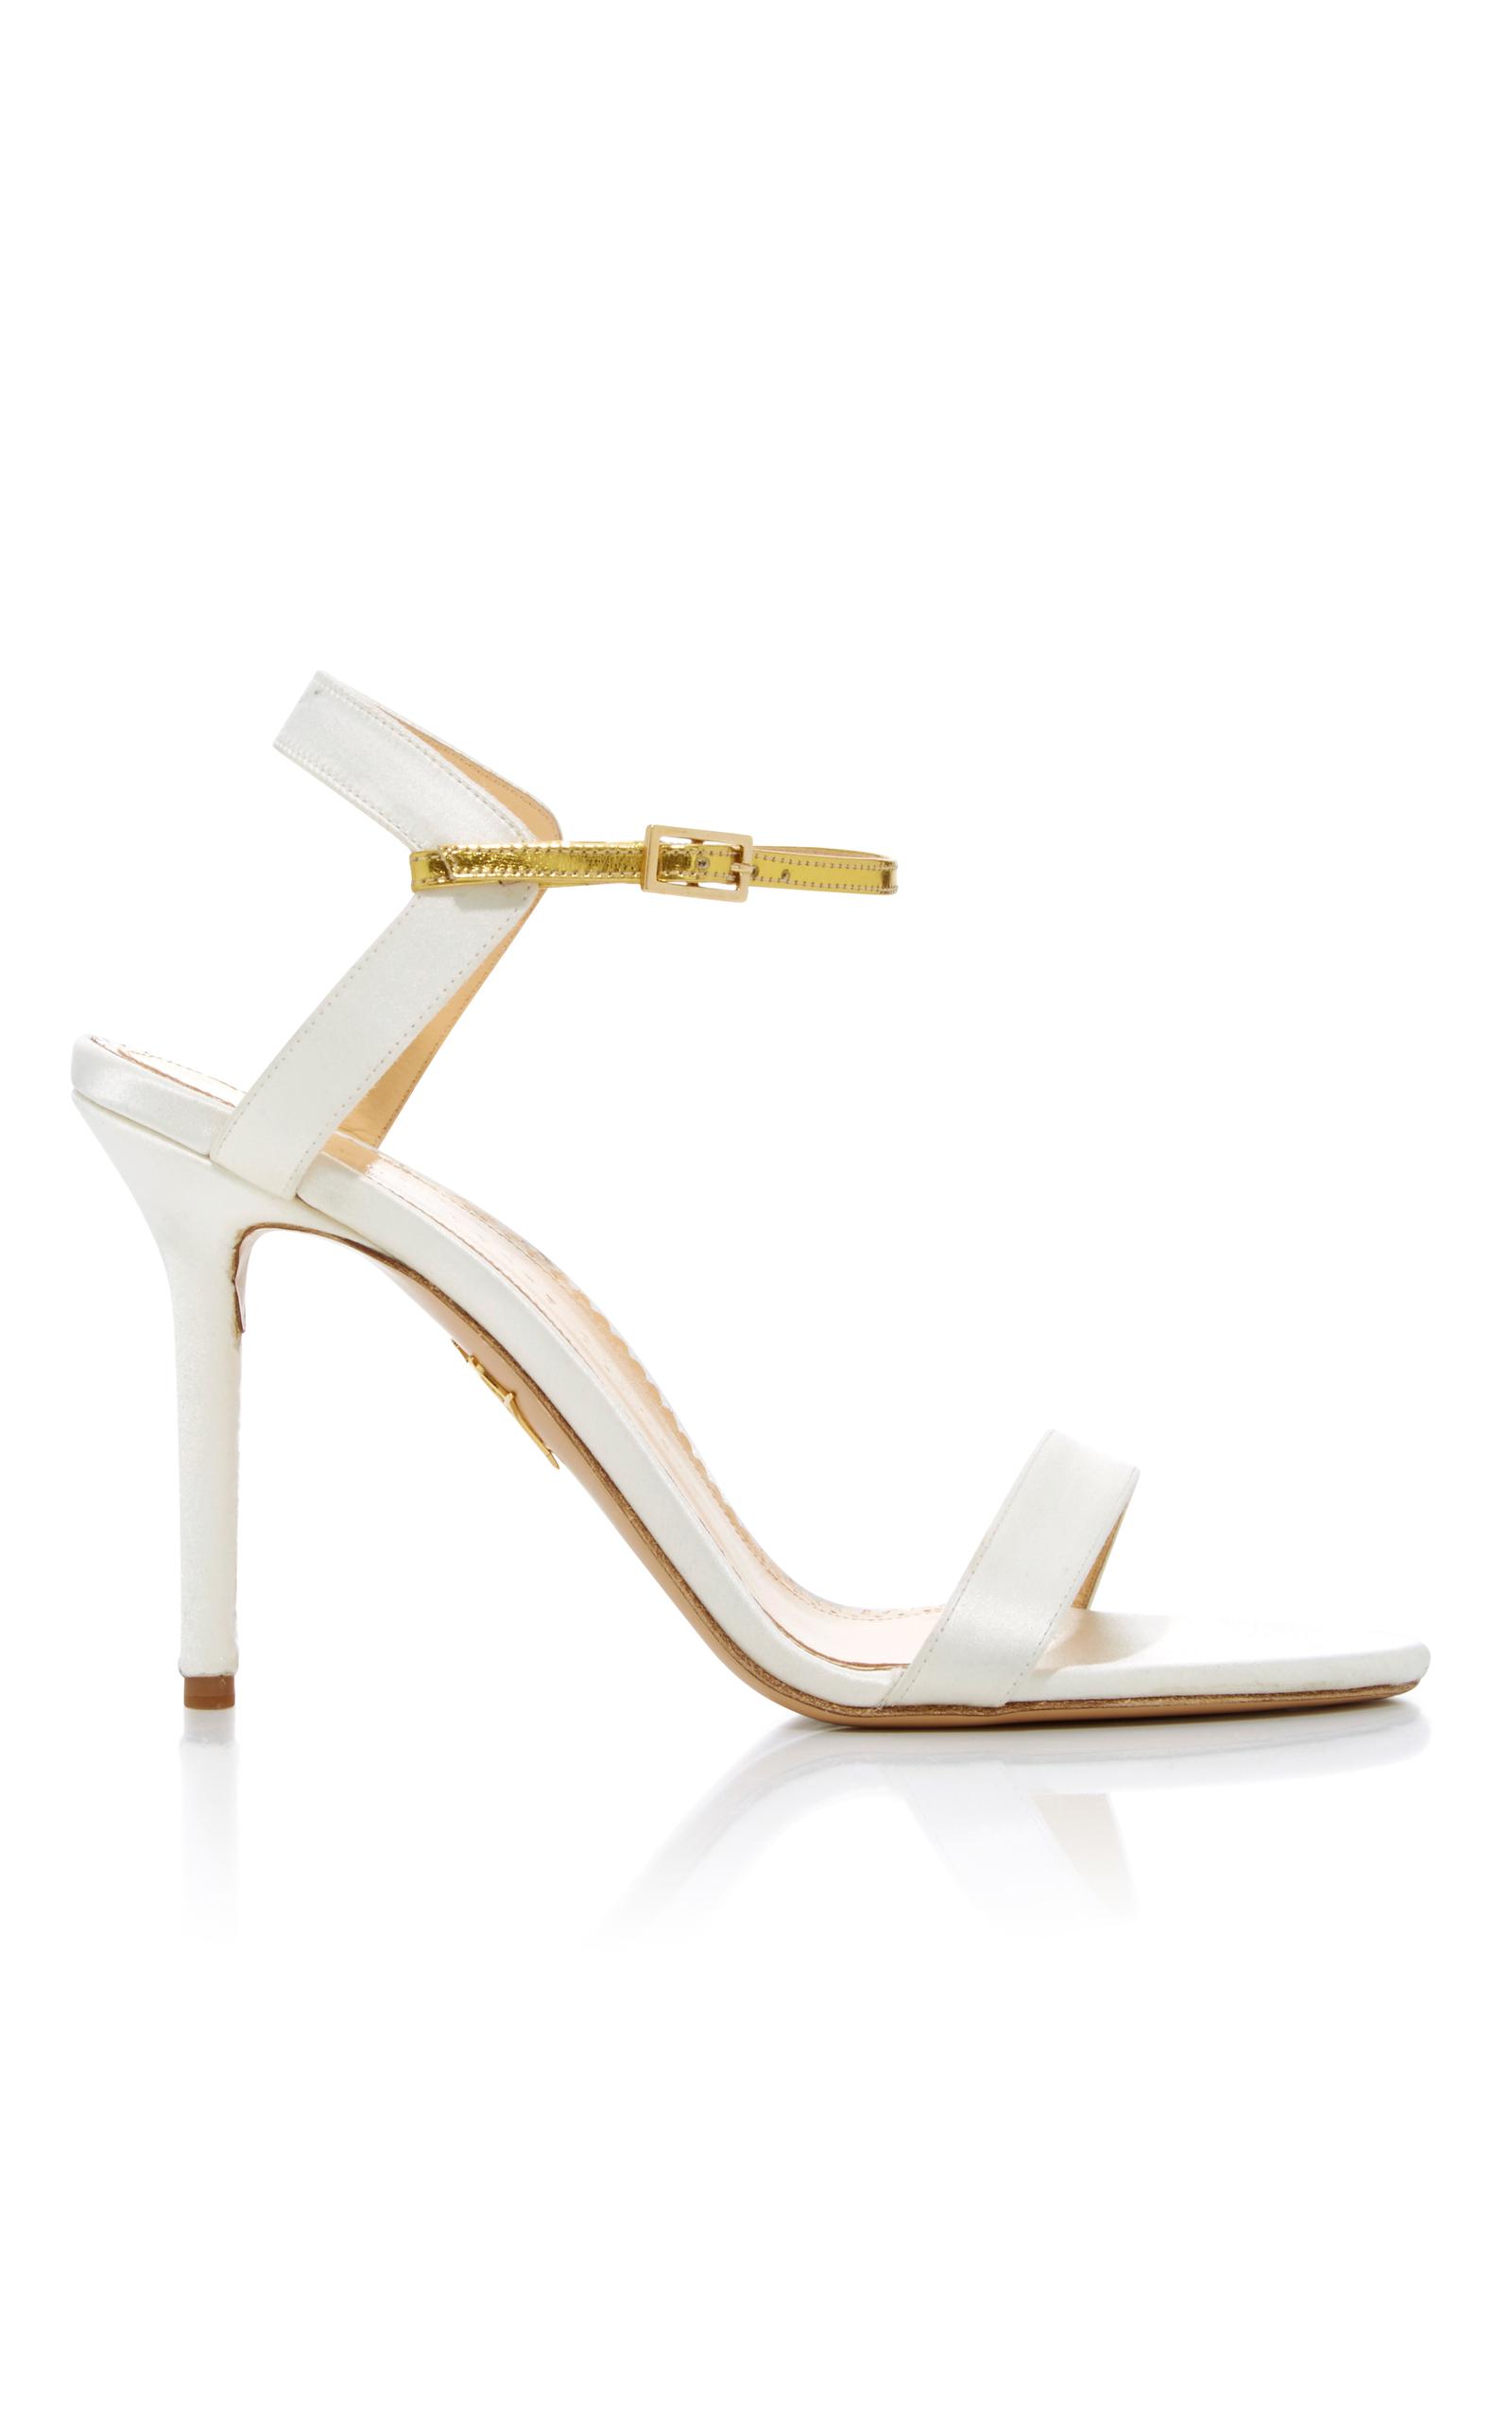 Charlotte Olympia Quintessential Leather-trimmed Satin Sandals in 